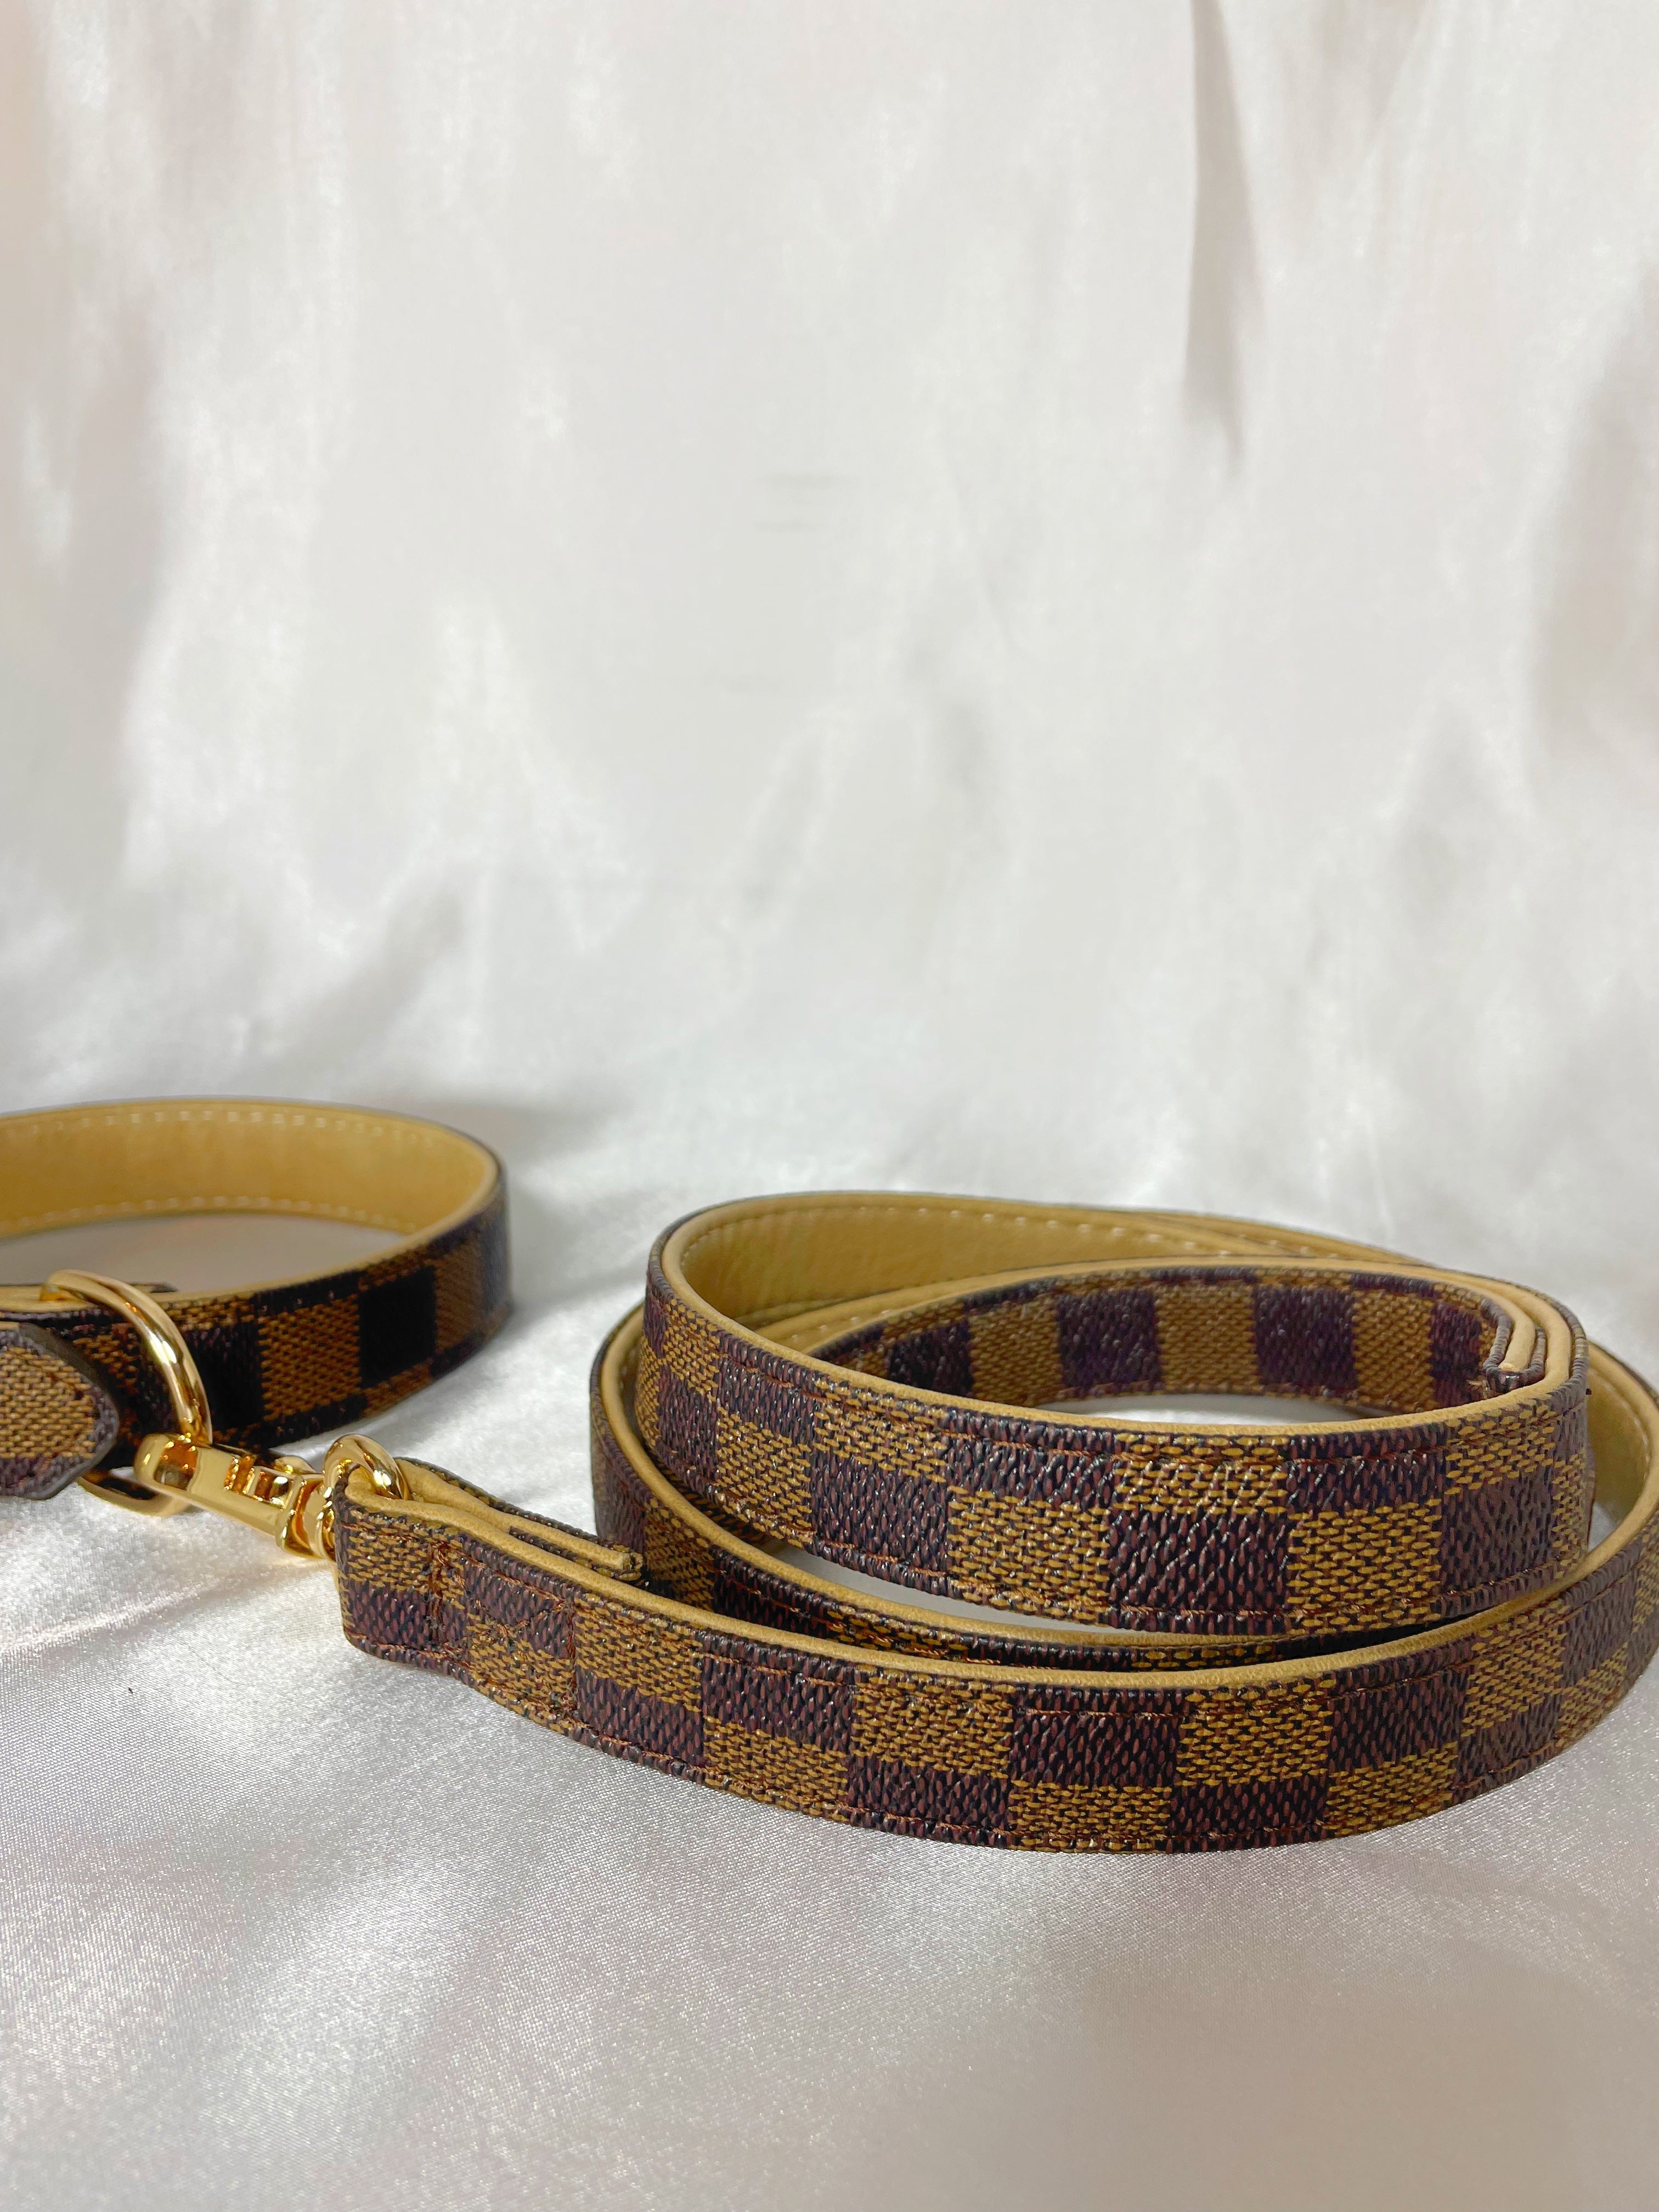 Chewy Vuitton - Classic Mongram Harness and Leash Set